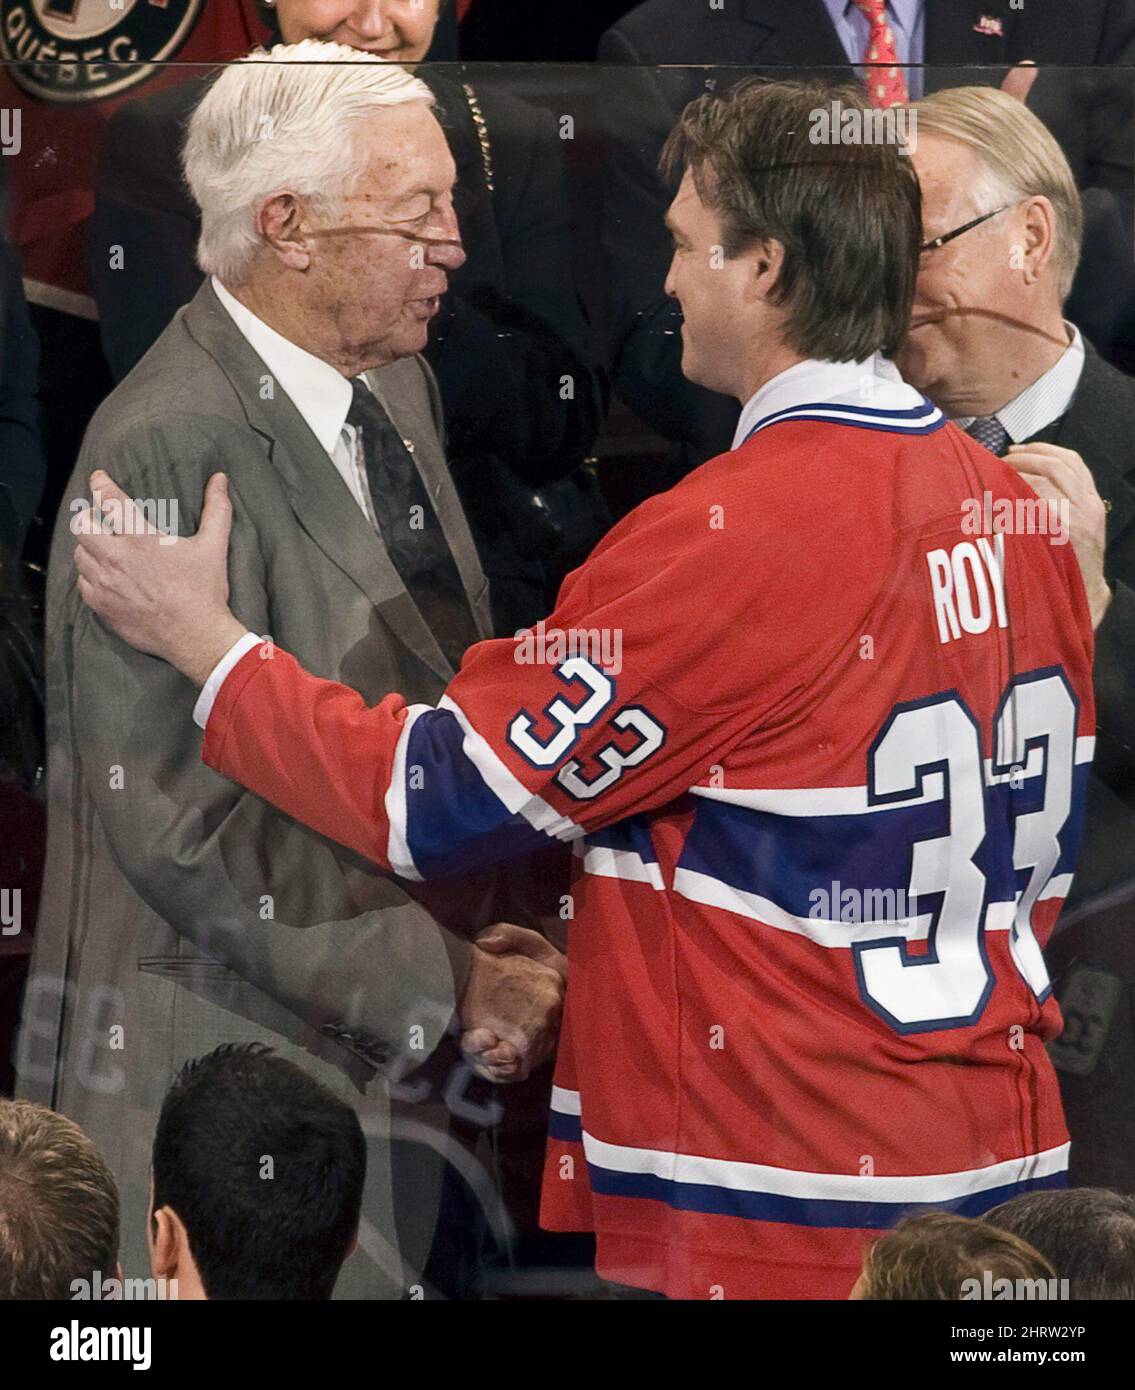 Roy says he's 'coming home' as No. 33 jersey is retired at Bell